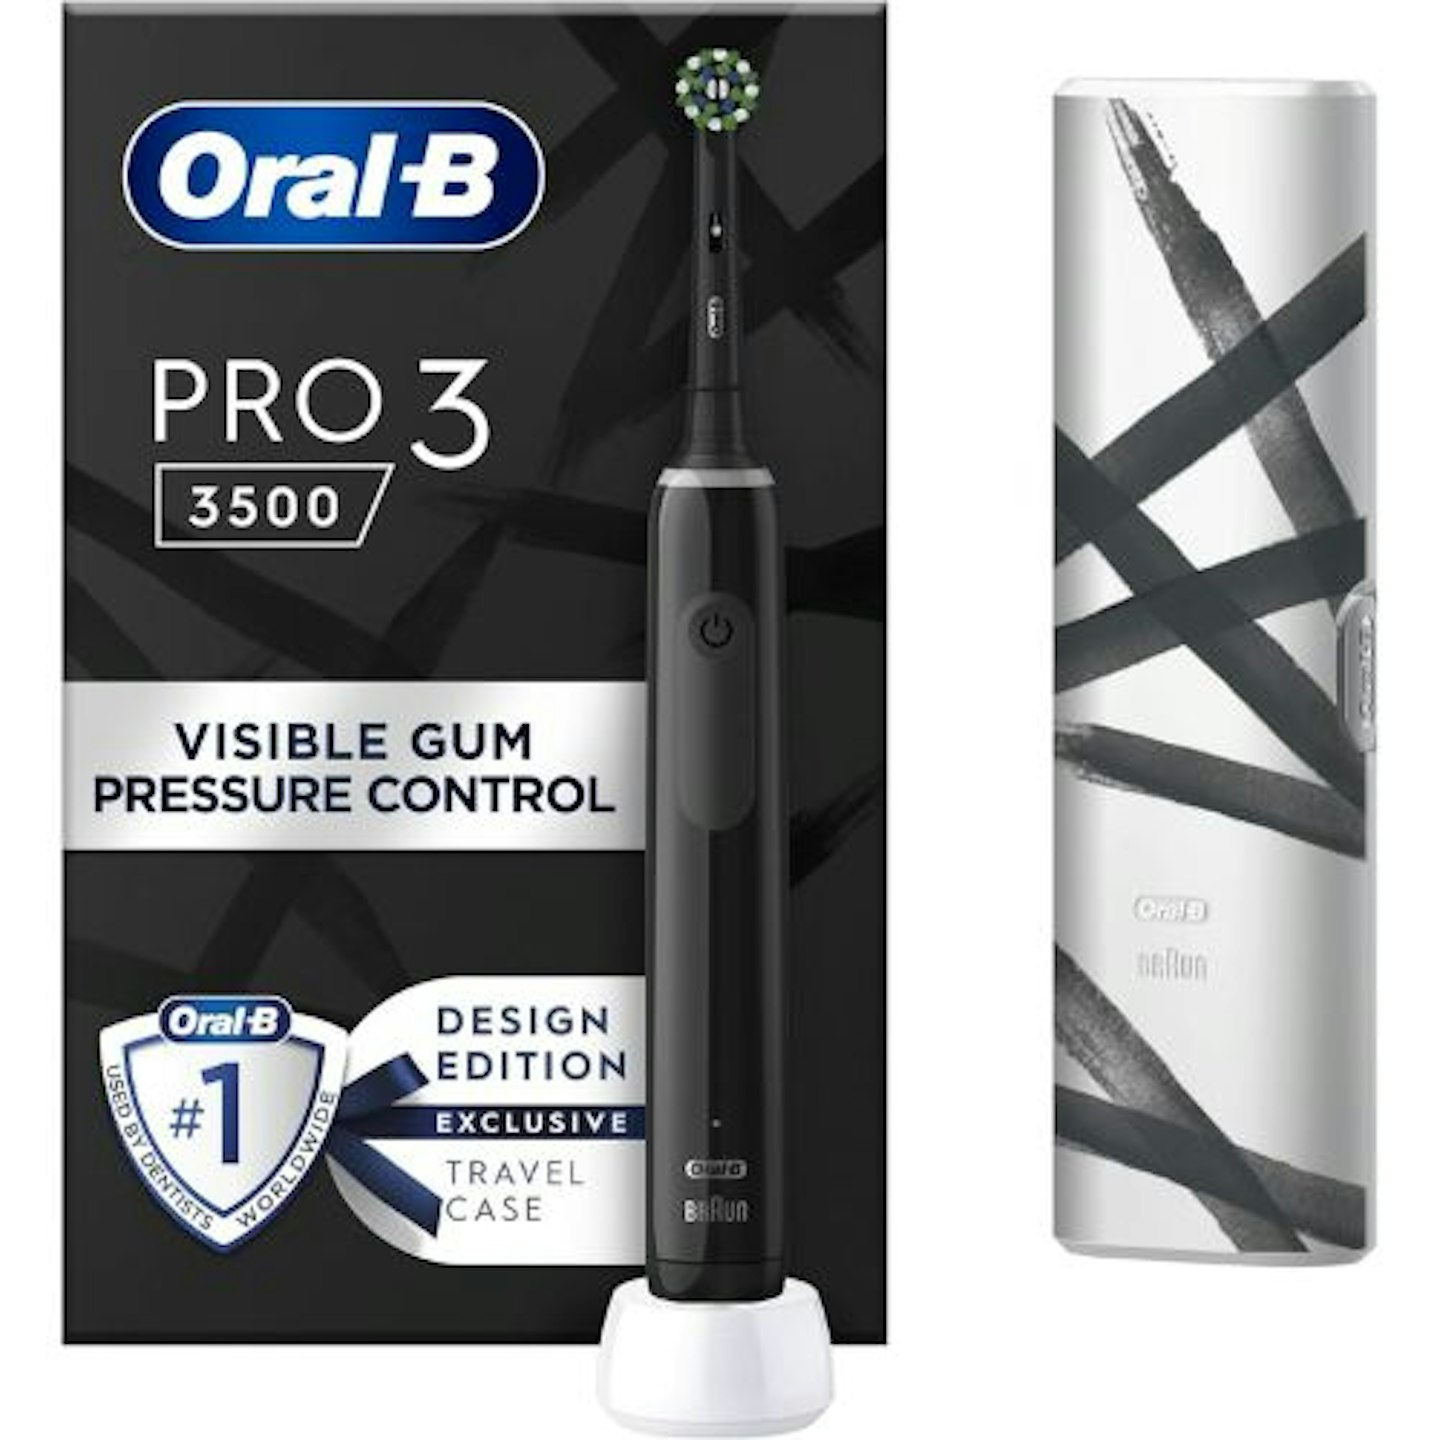 Oral-B Pro 3 Electric Toothbrush, 1 Toothbrush Head & Travel Case